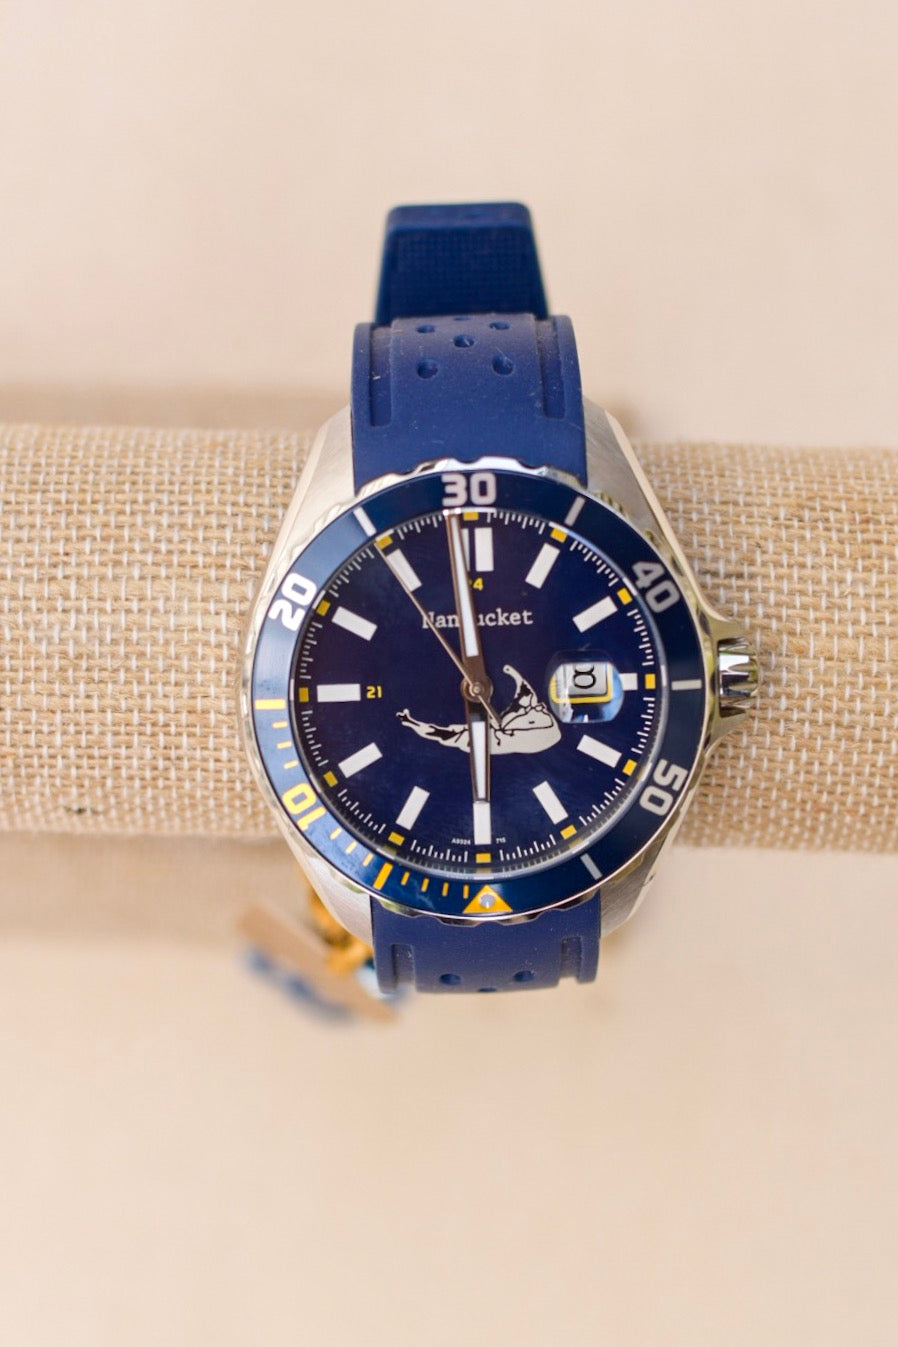 Nantucket Island Chronograph Dive Watch with blue strap by Jewel in the Sea Nantucket